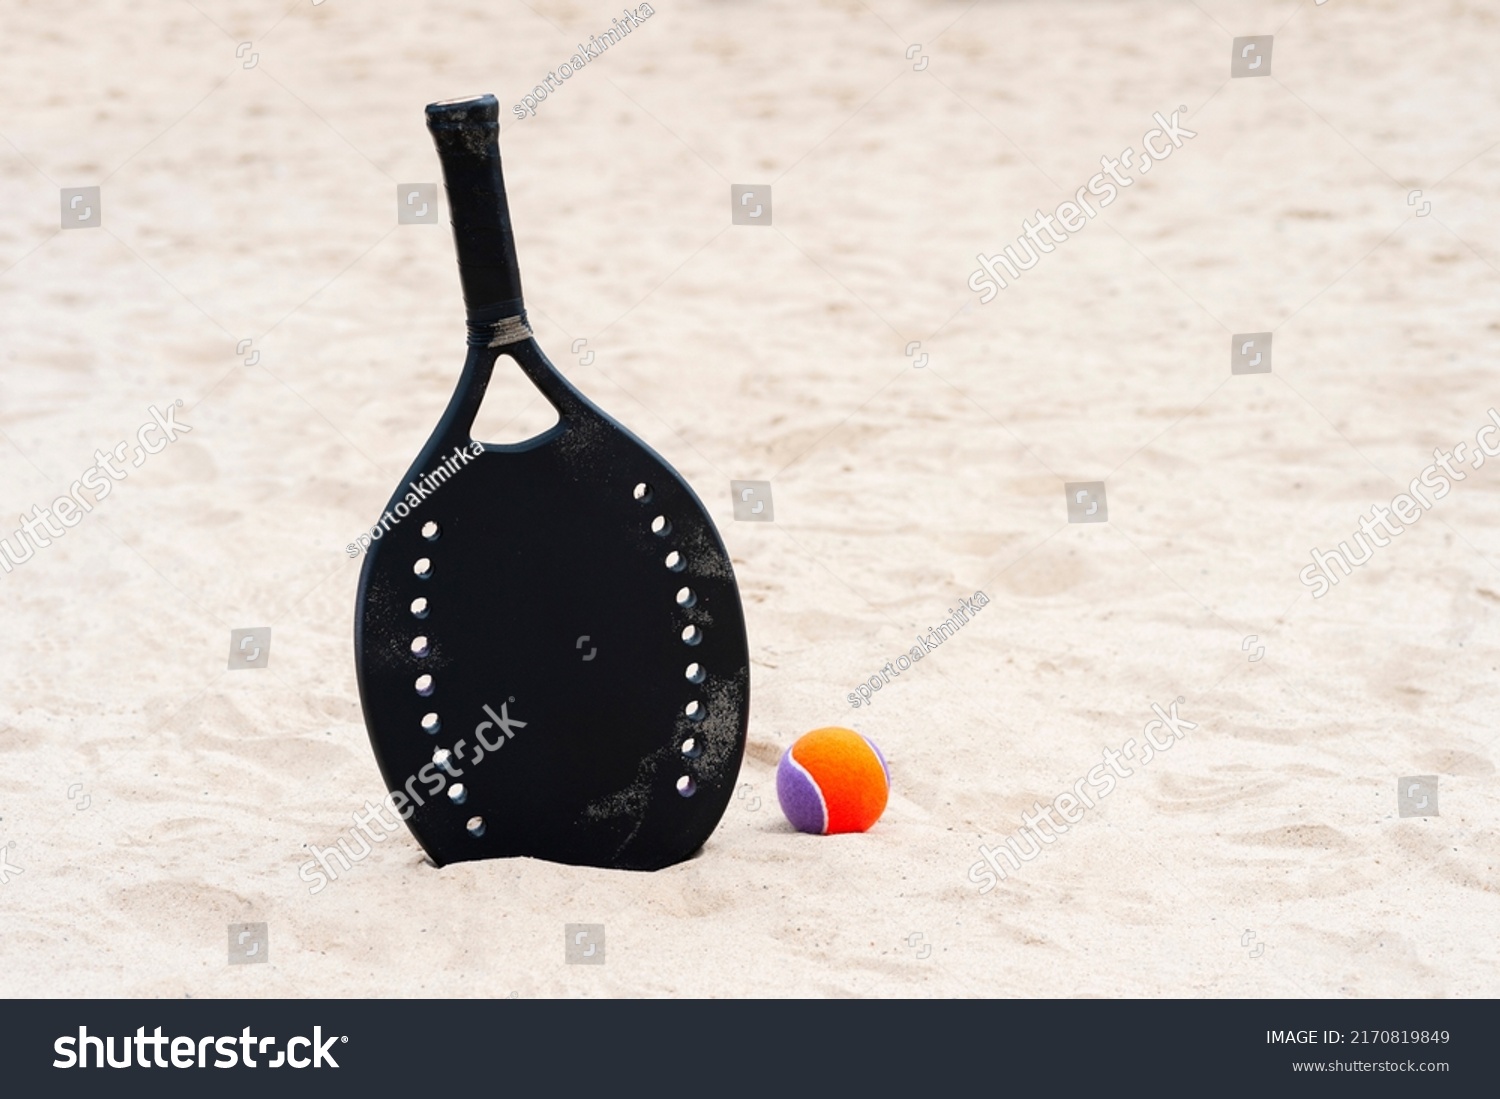 Racket and ball on the sandy beach. Summer sport concept. Horizontal sport theme poster, greeting cards, headers, website and app #2170819849